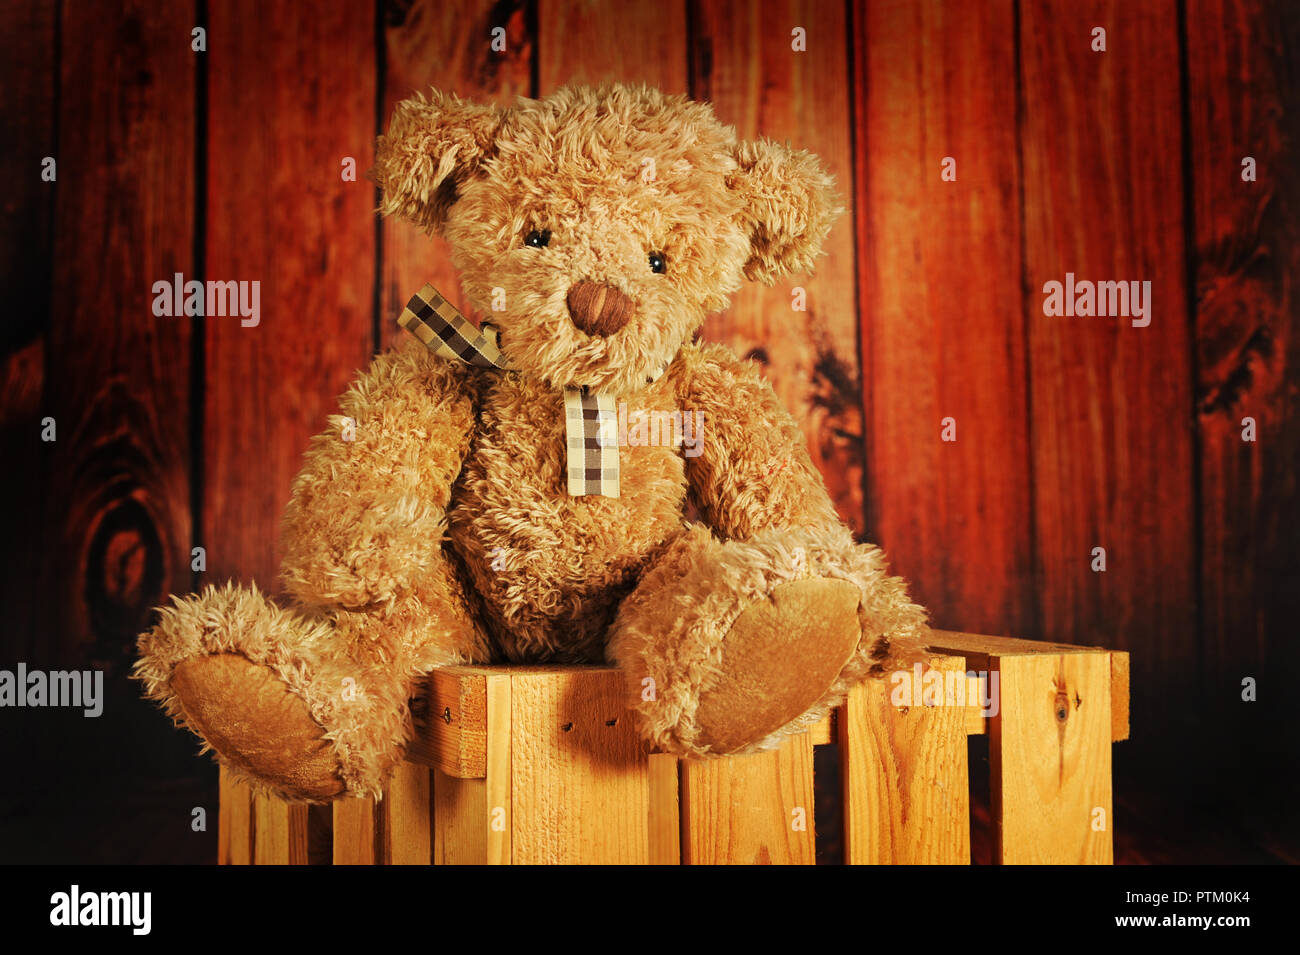 Teddy bear with brown plaid bow on wooden box, Austria Stock Photo